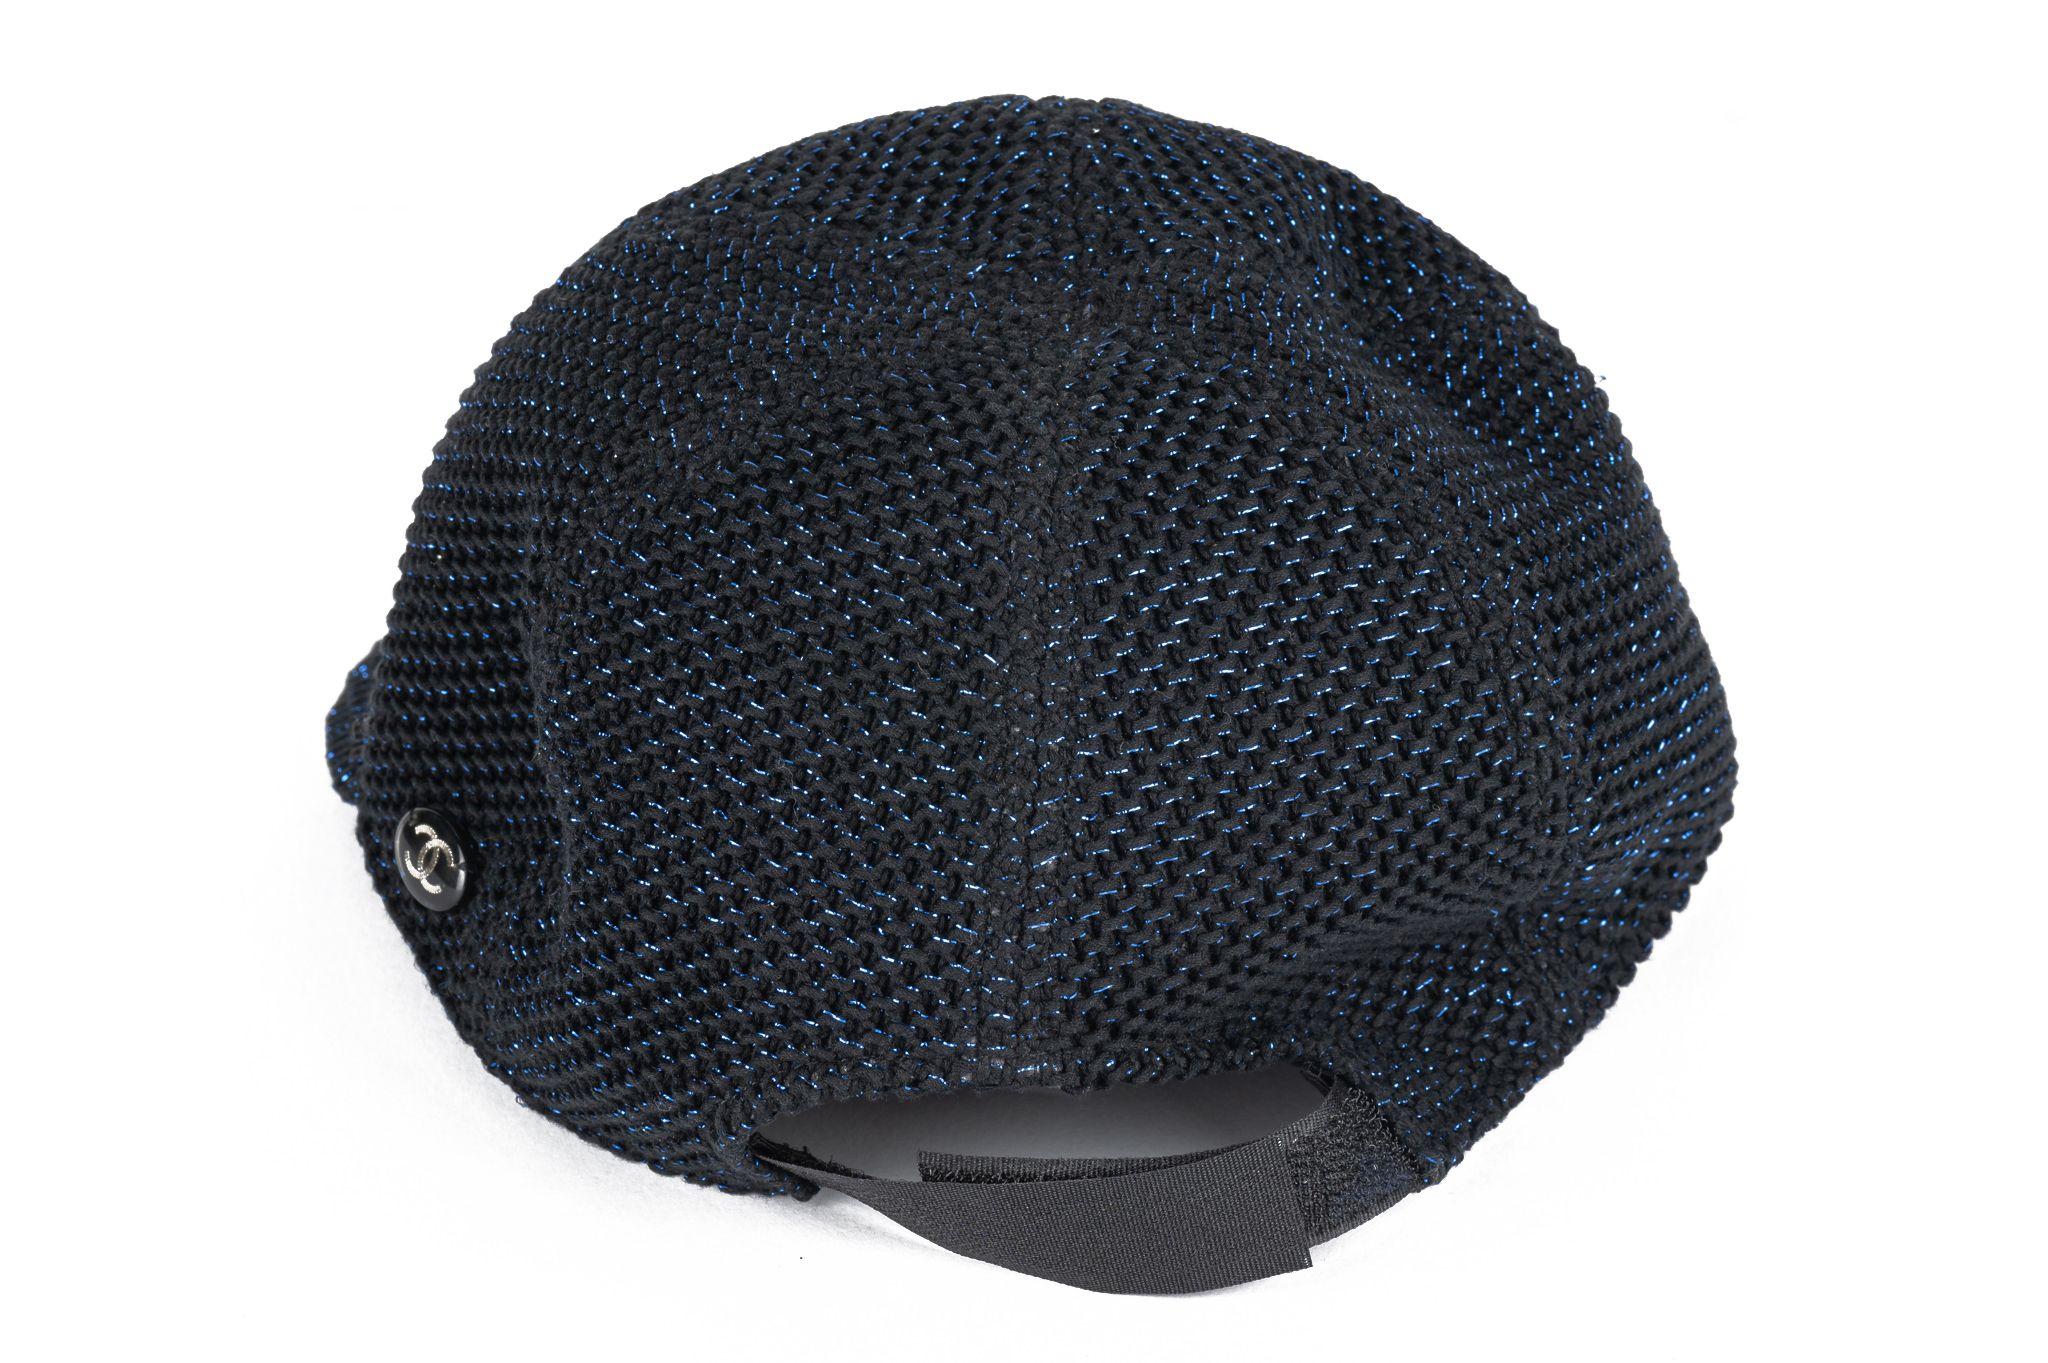 Chanel new medium size baseball hat, black with blue lurex. Adjustable velcro strap, comes with original box.